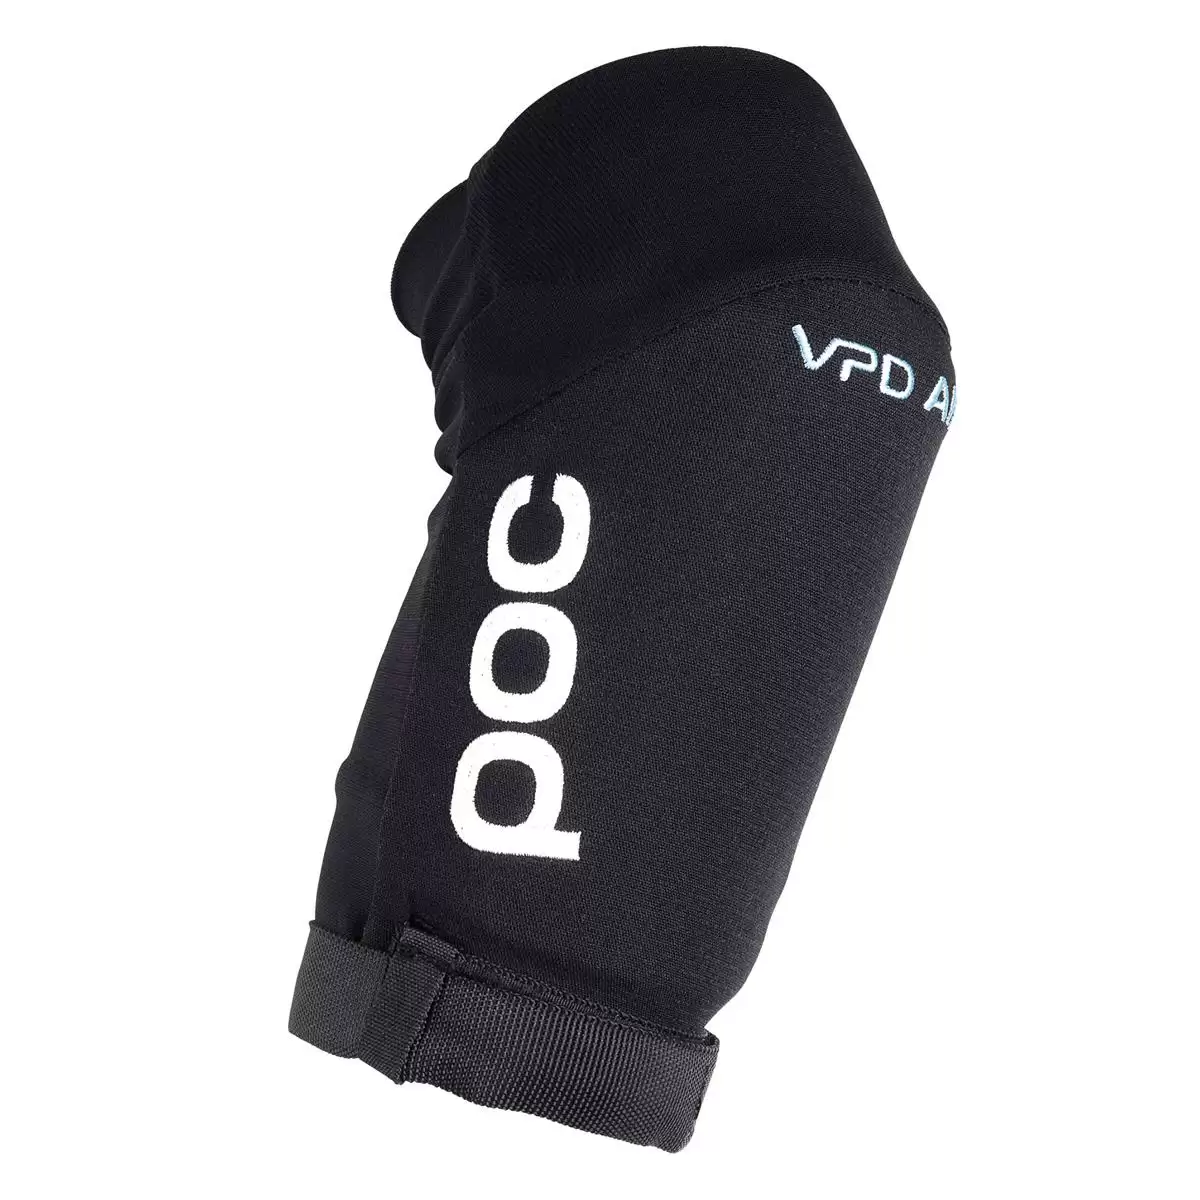 Joint VPD Air Elbow pads black size XS - image